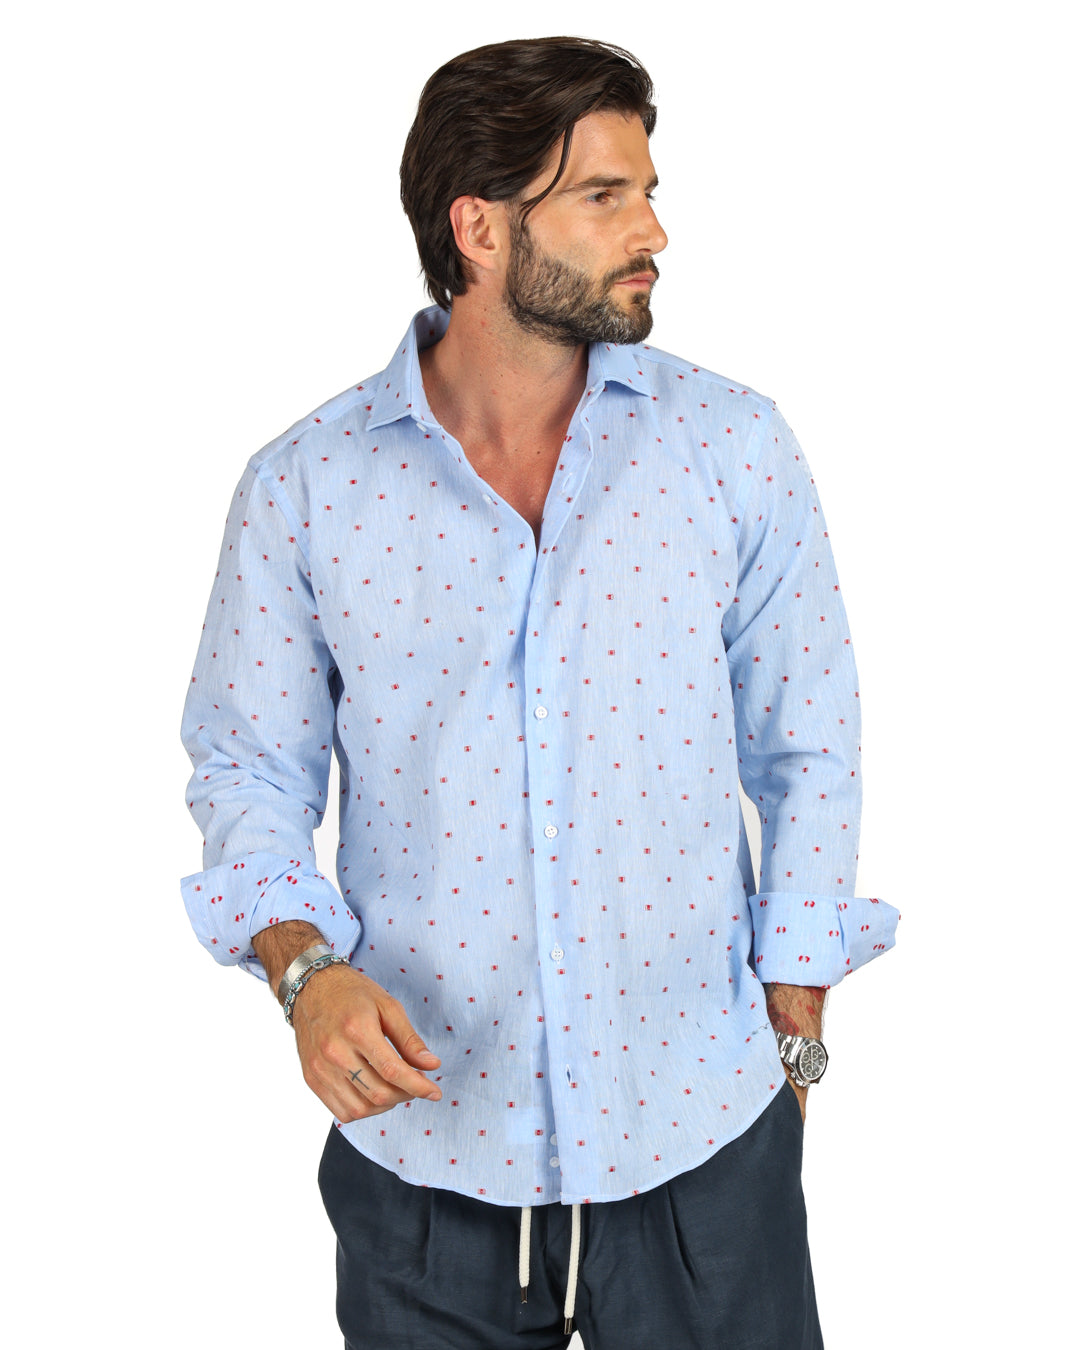 Salina - Classic light blue linen shirt with red embroidery